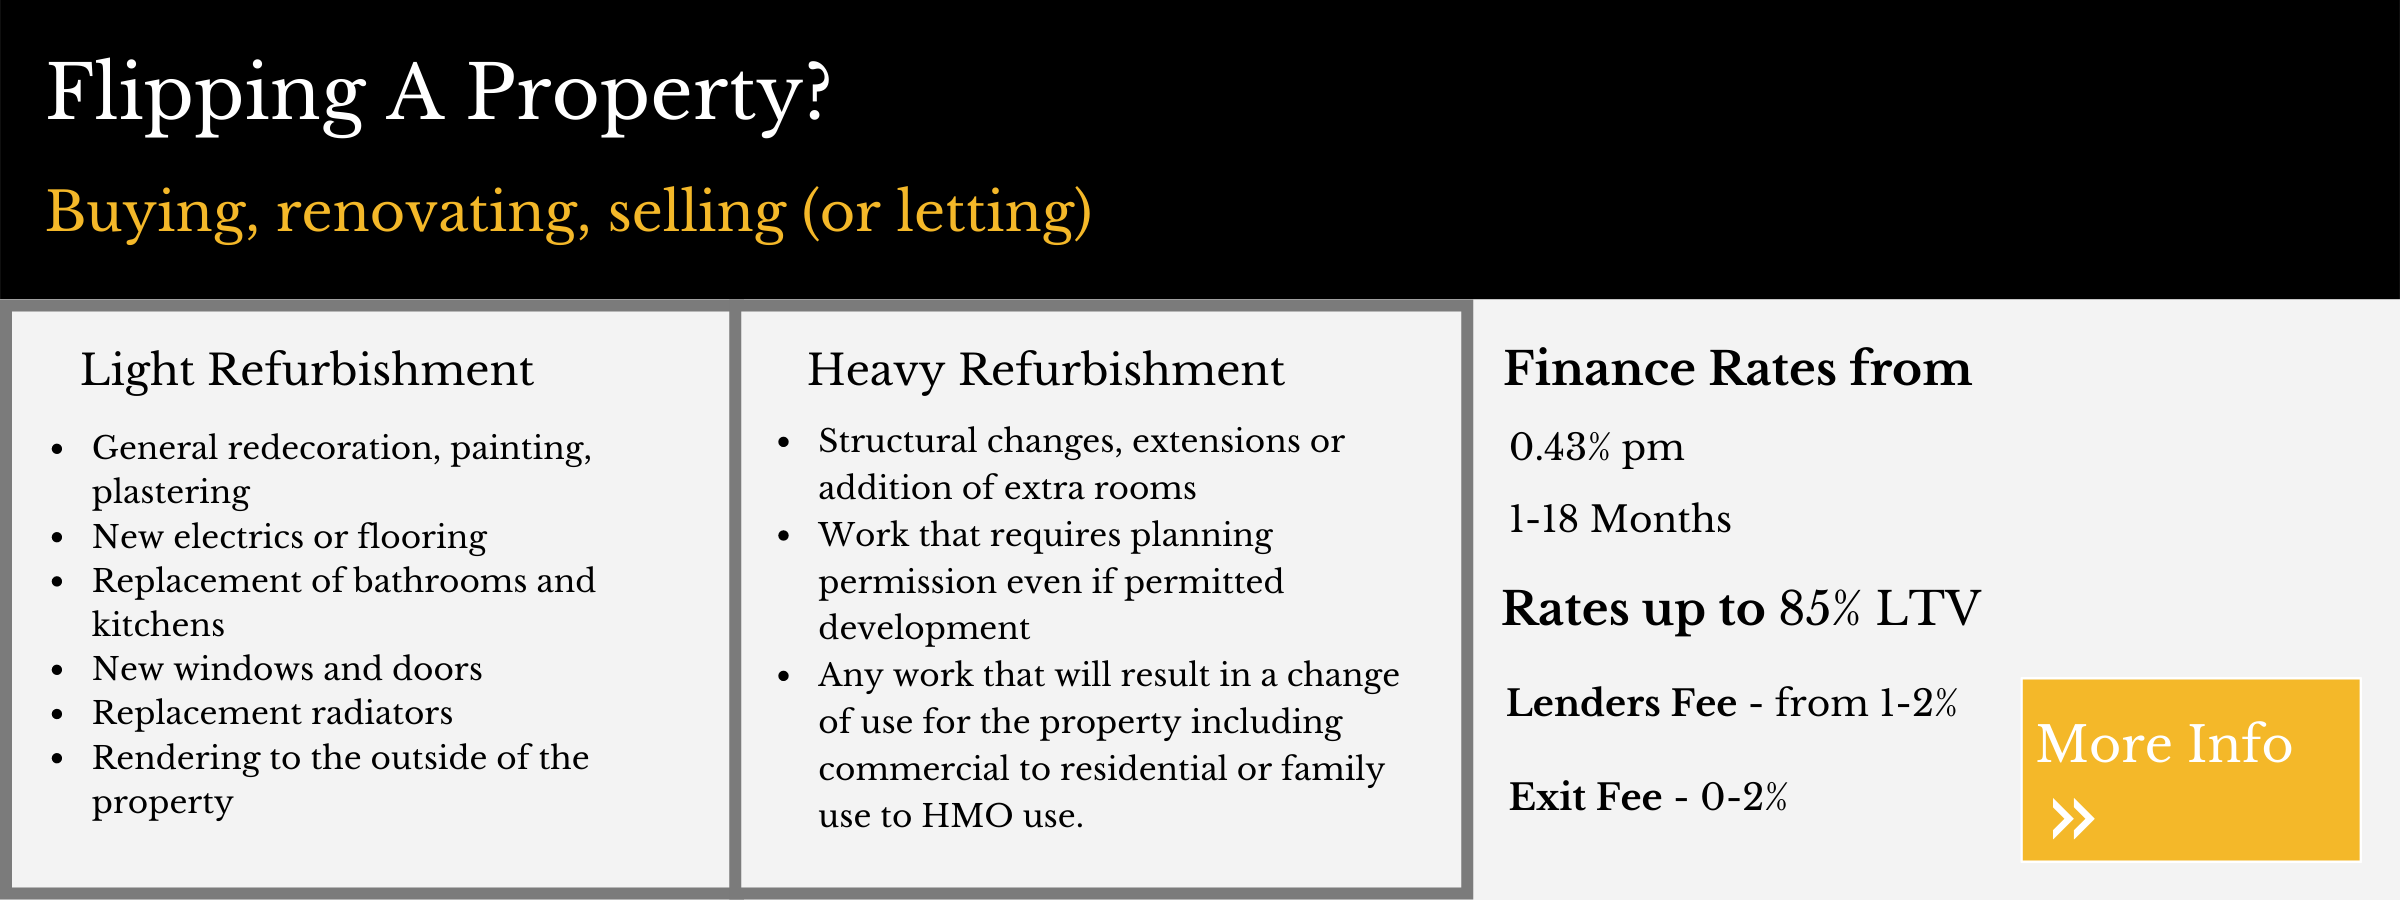 Refurbishment loan rates and terms from Clifton Private Finance